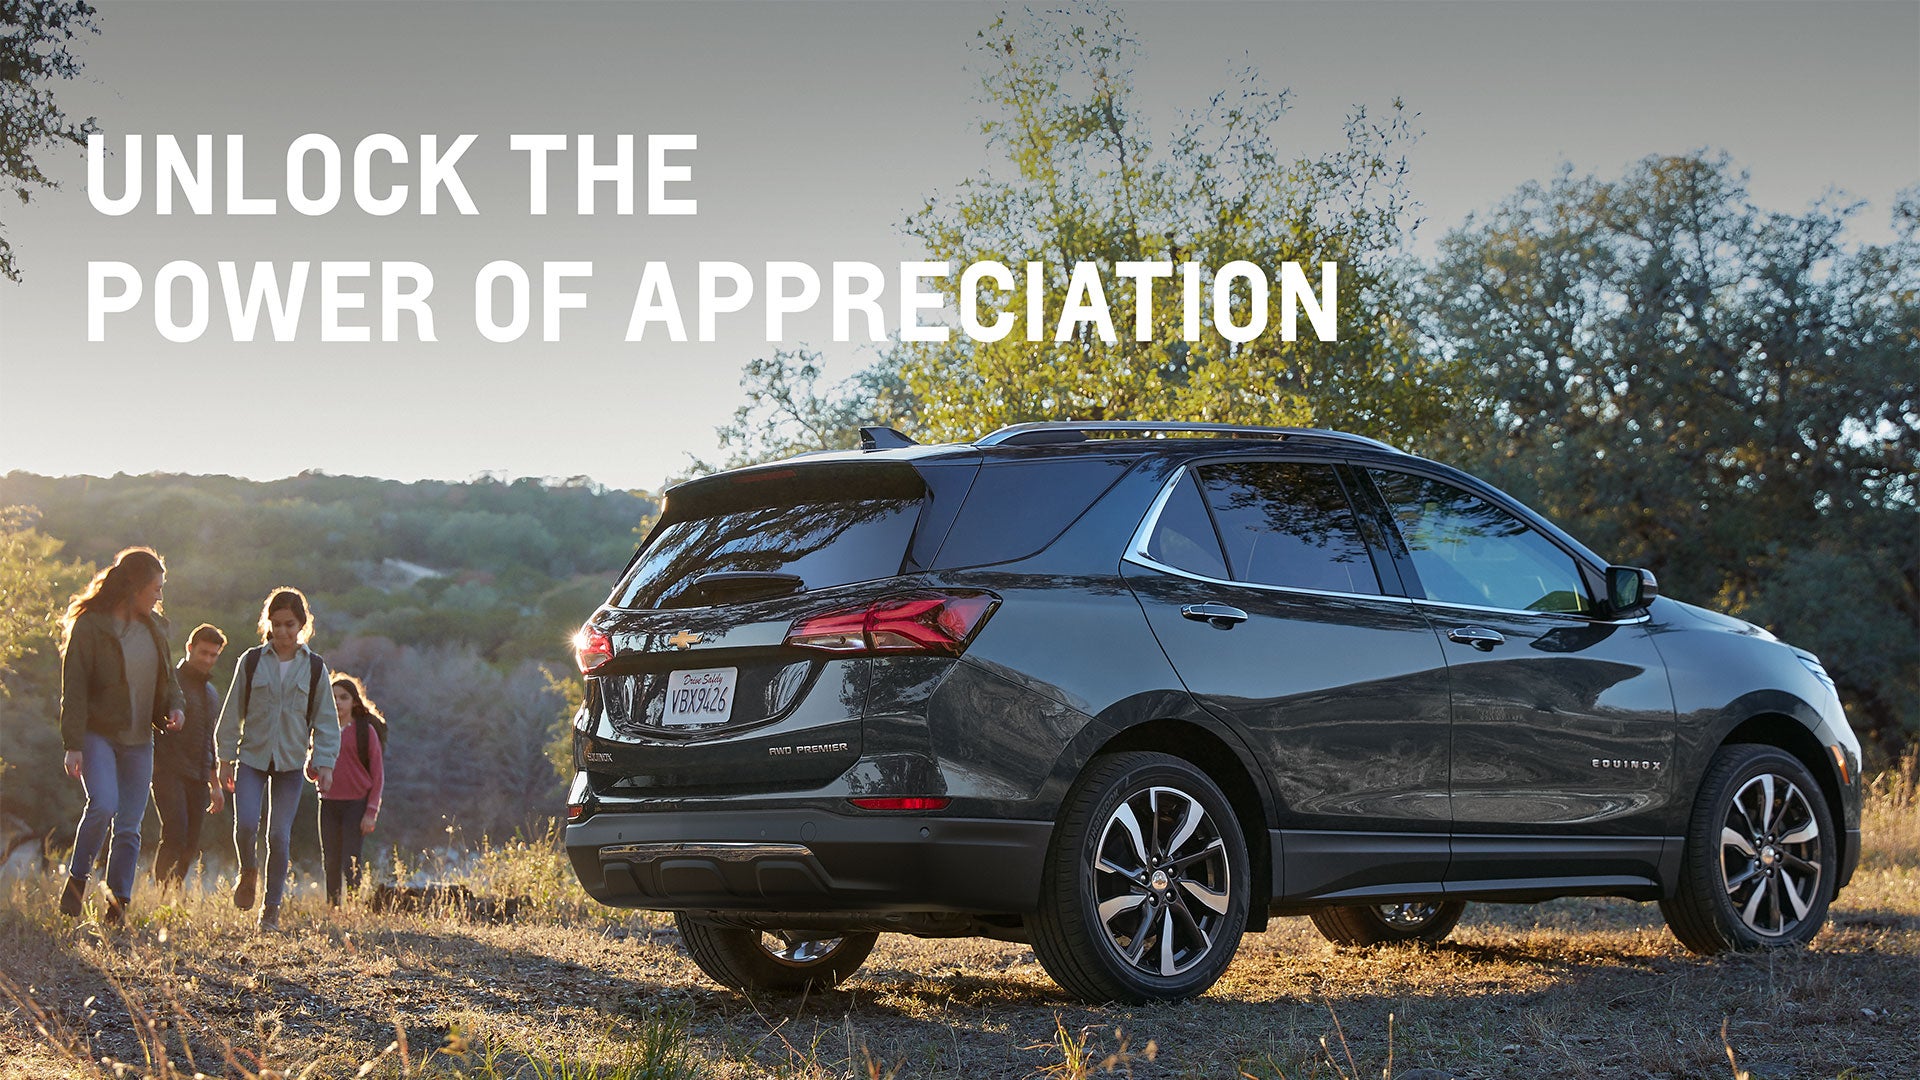 Unlock the power of appreciation | Stevinson Chevrolet in Lakewood CO